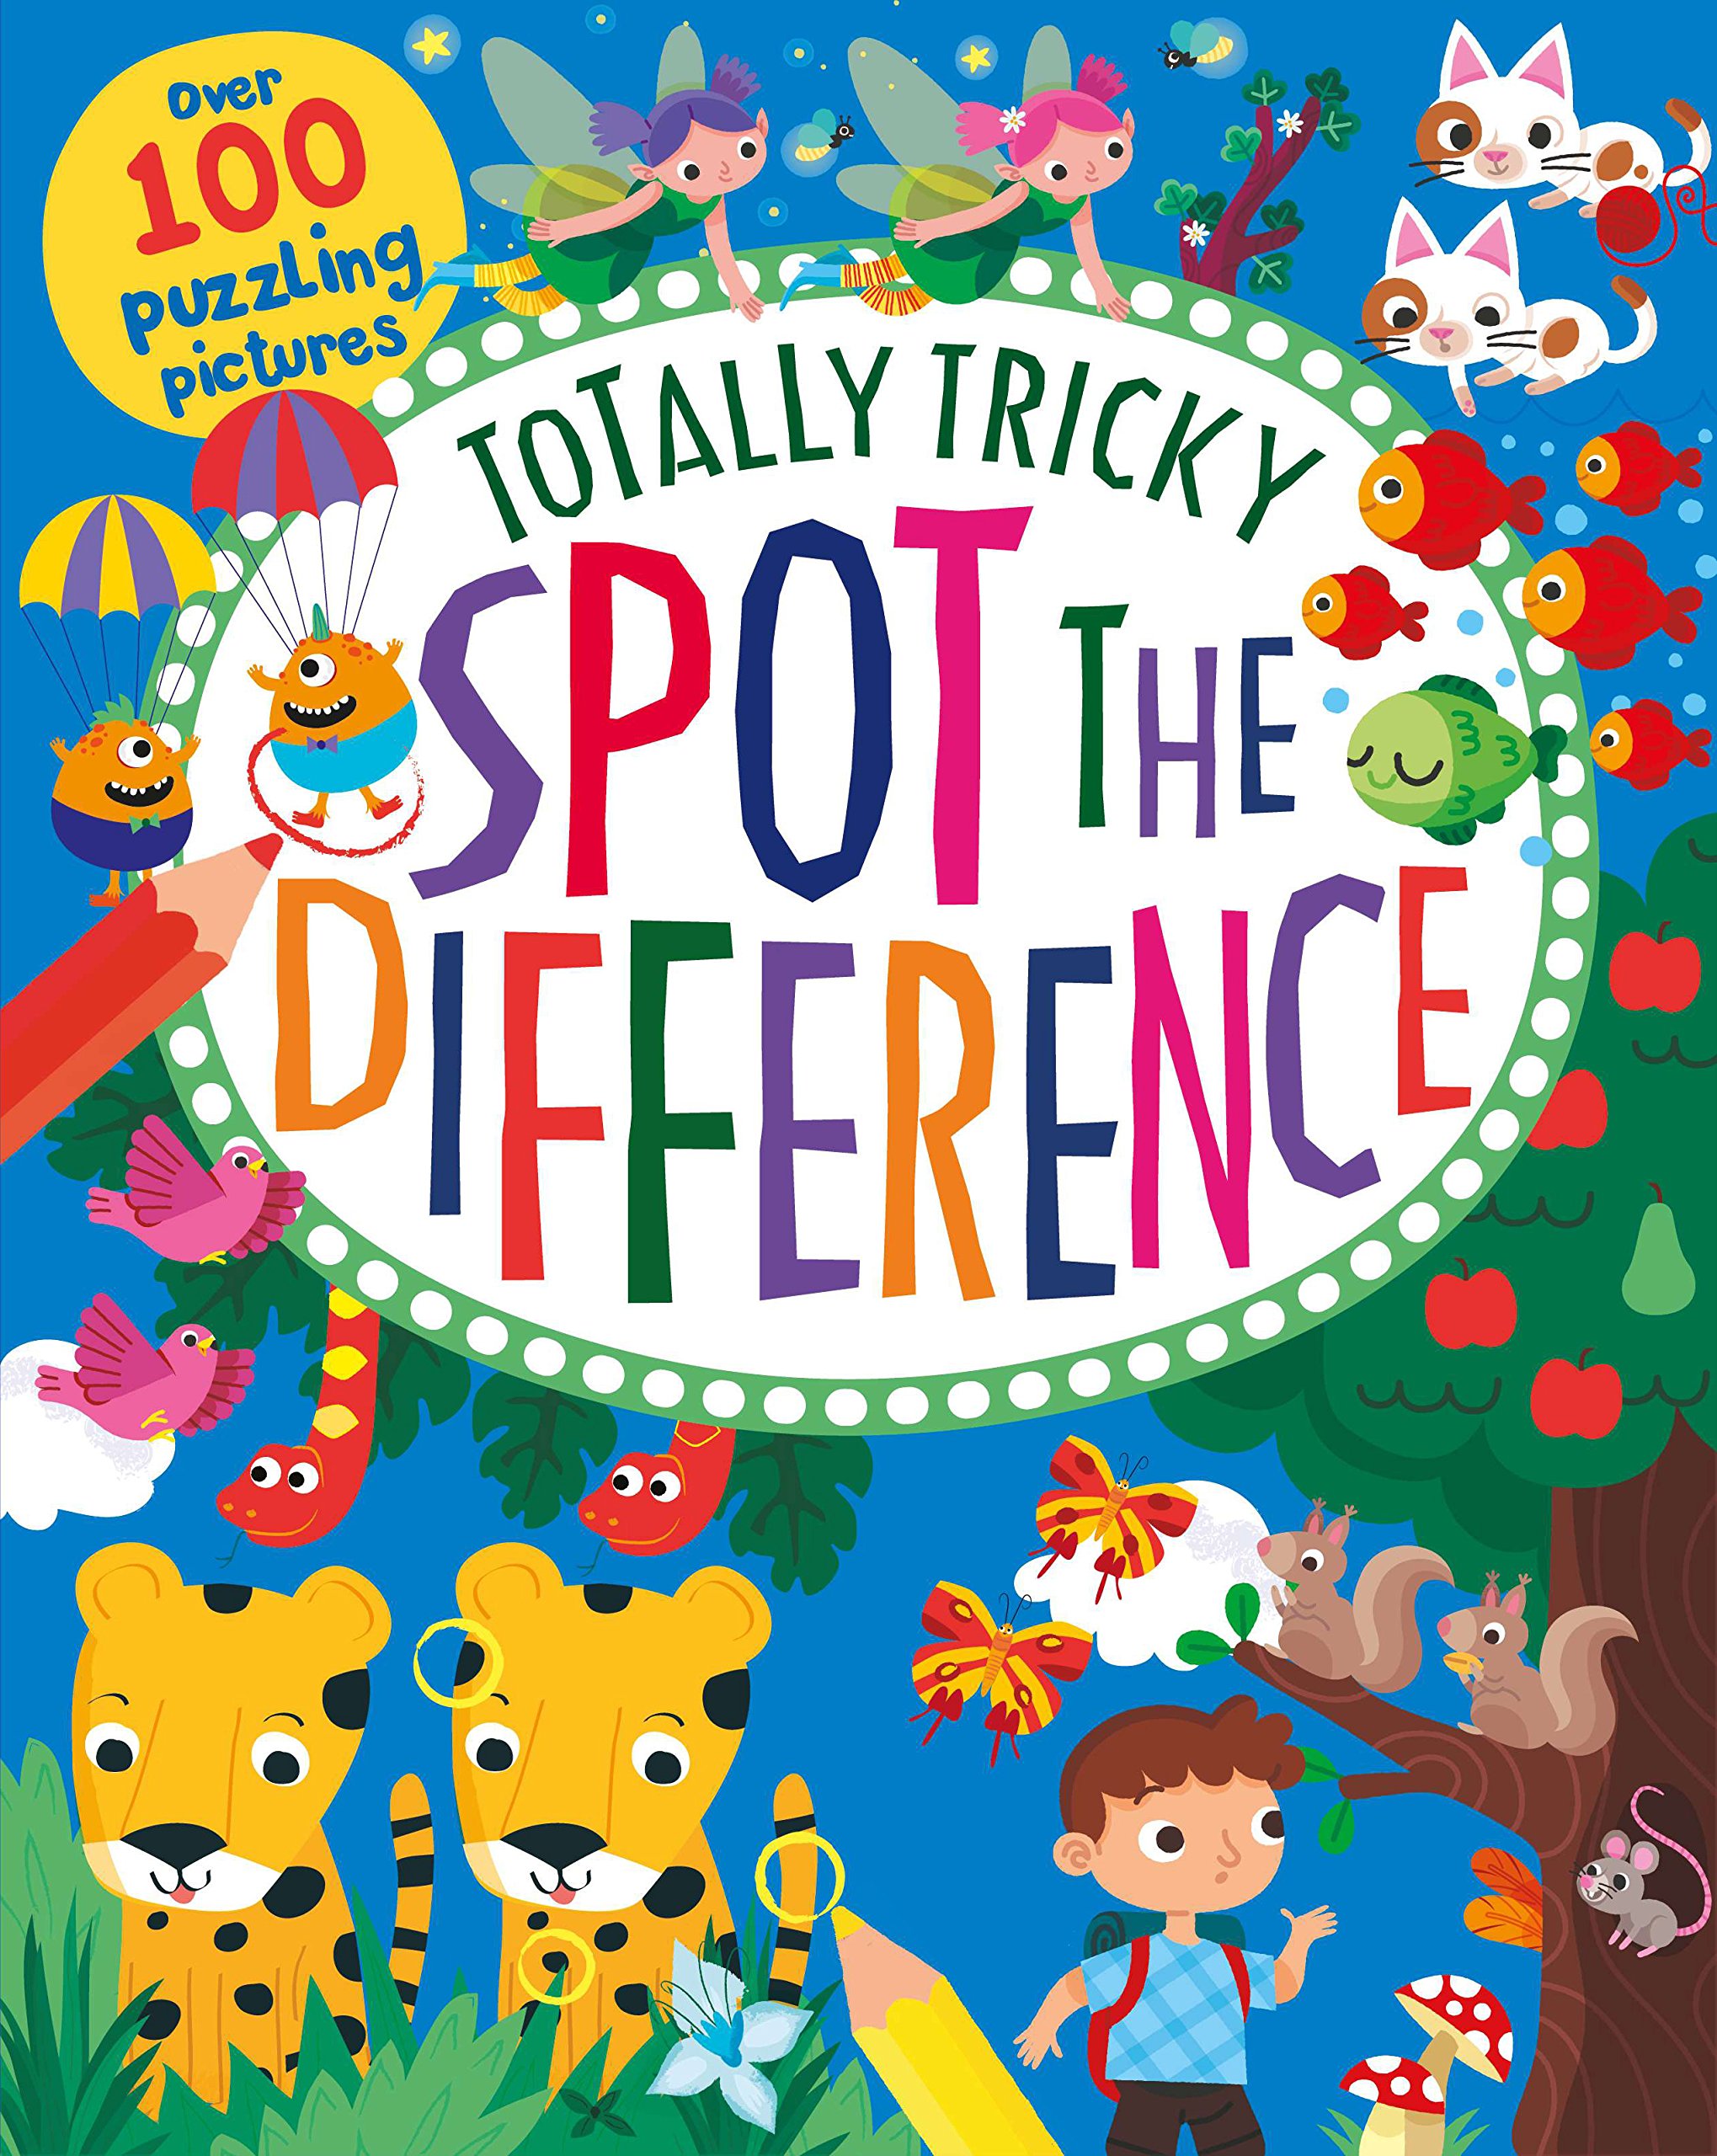 Totally Tricky Spot the Difference [Paperback] Paperback – January 1, 2017